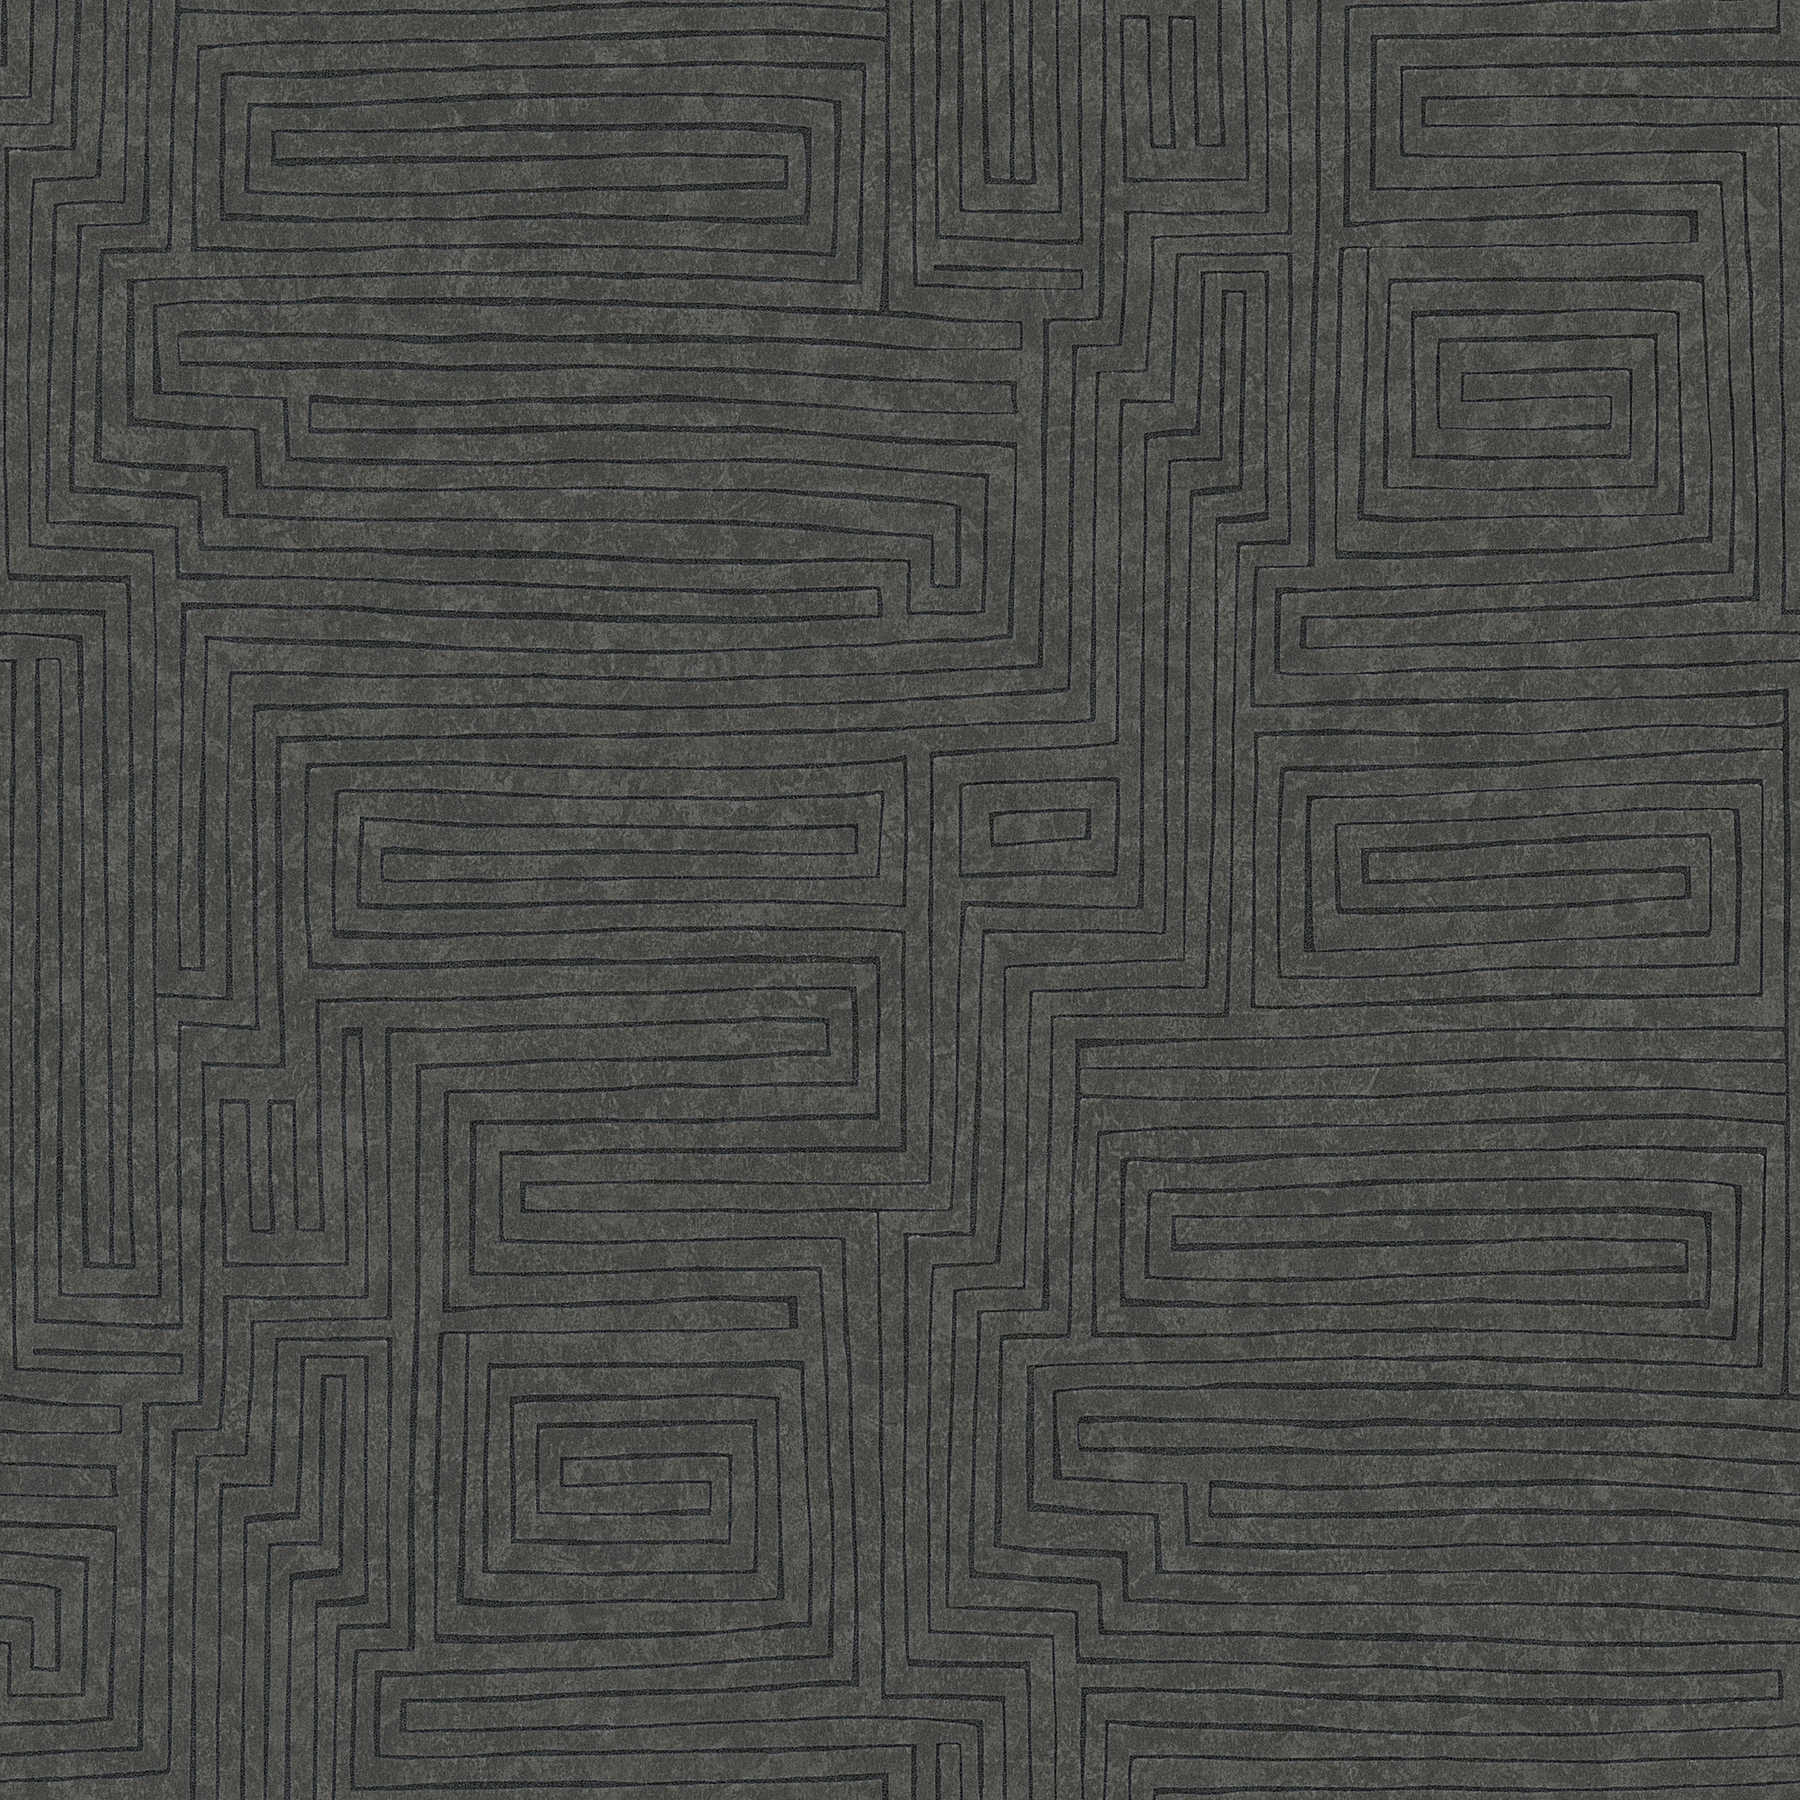 Ethno wallpaper plain with line pattern & texture effect - brown, black
